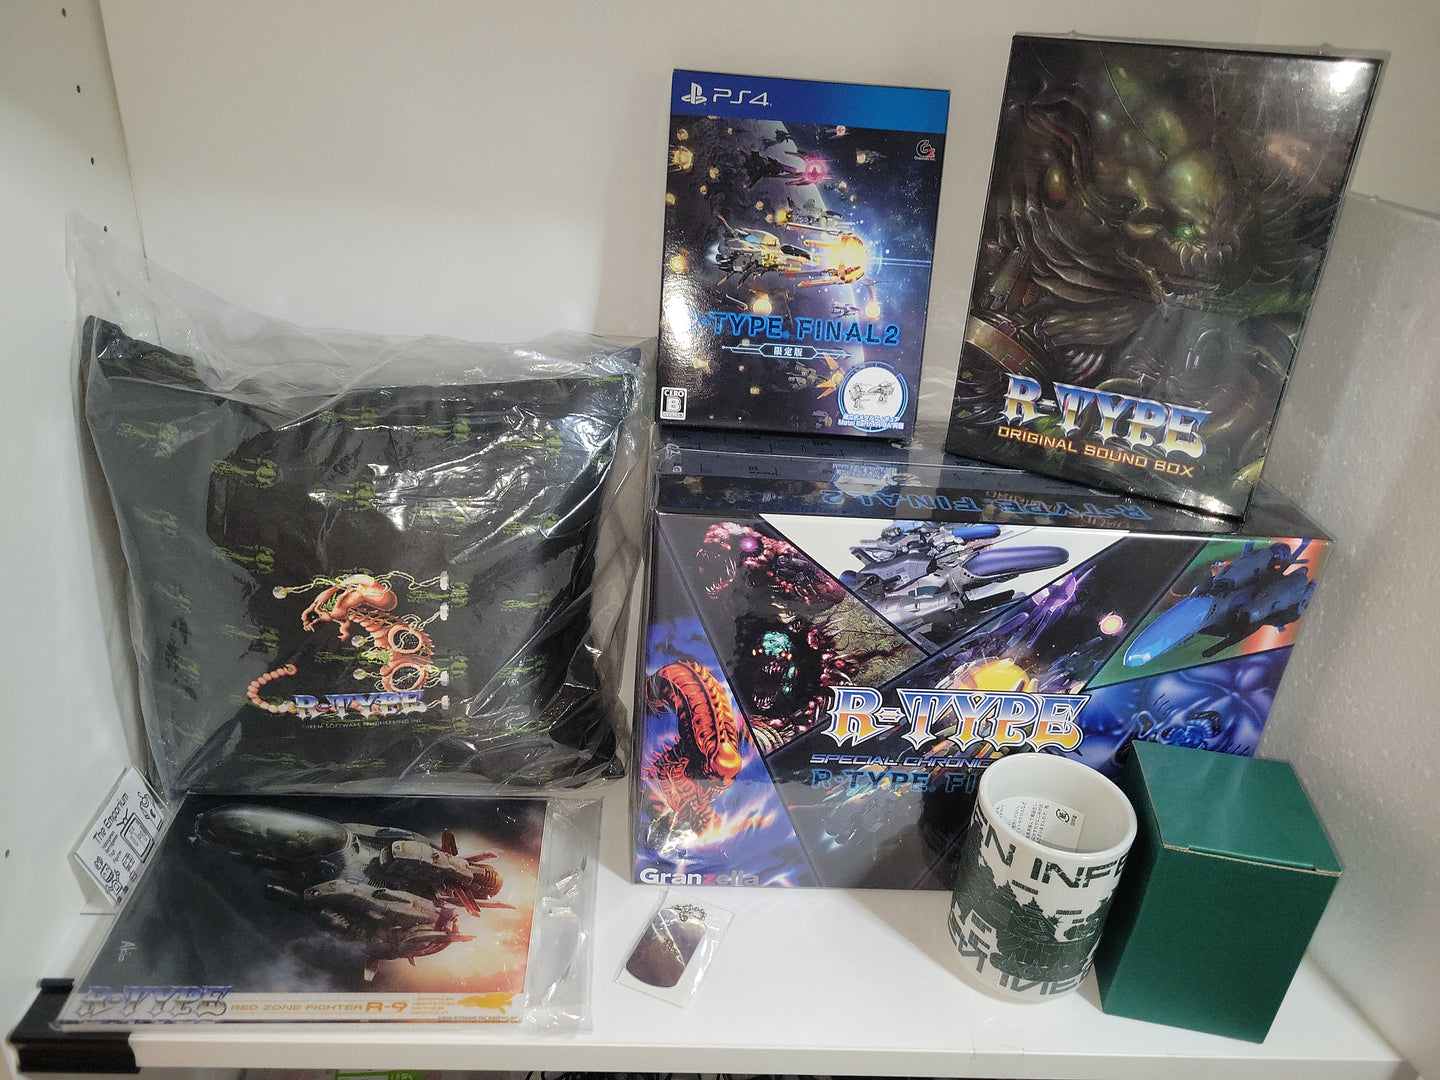 R-Type Final 2 [Deluxe Limited Edition] - Sony PS4 Playstation 4